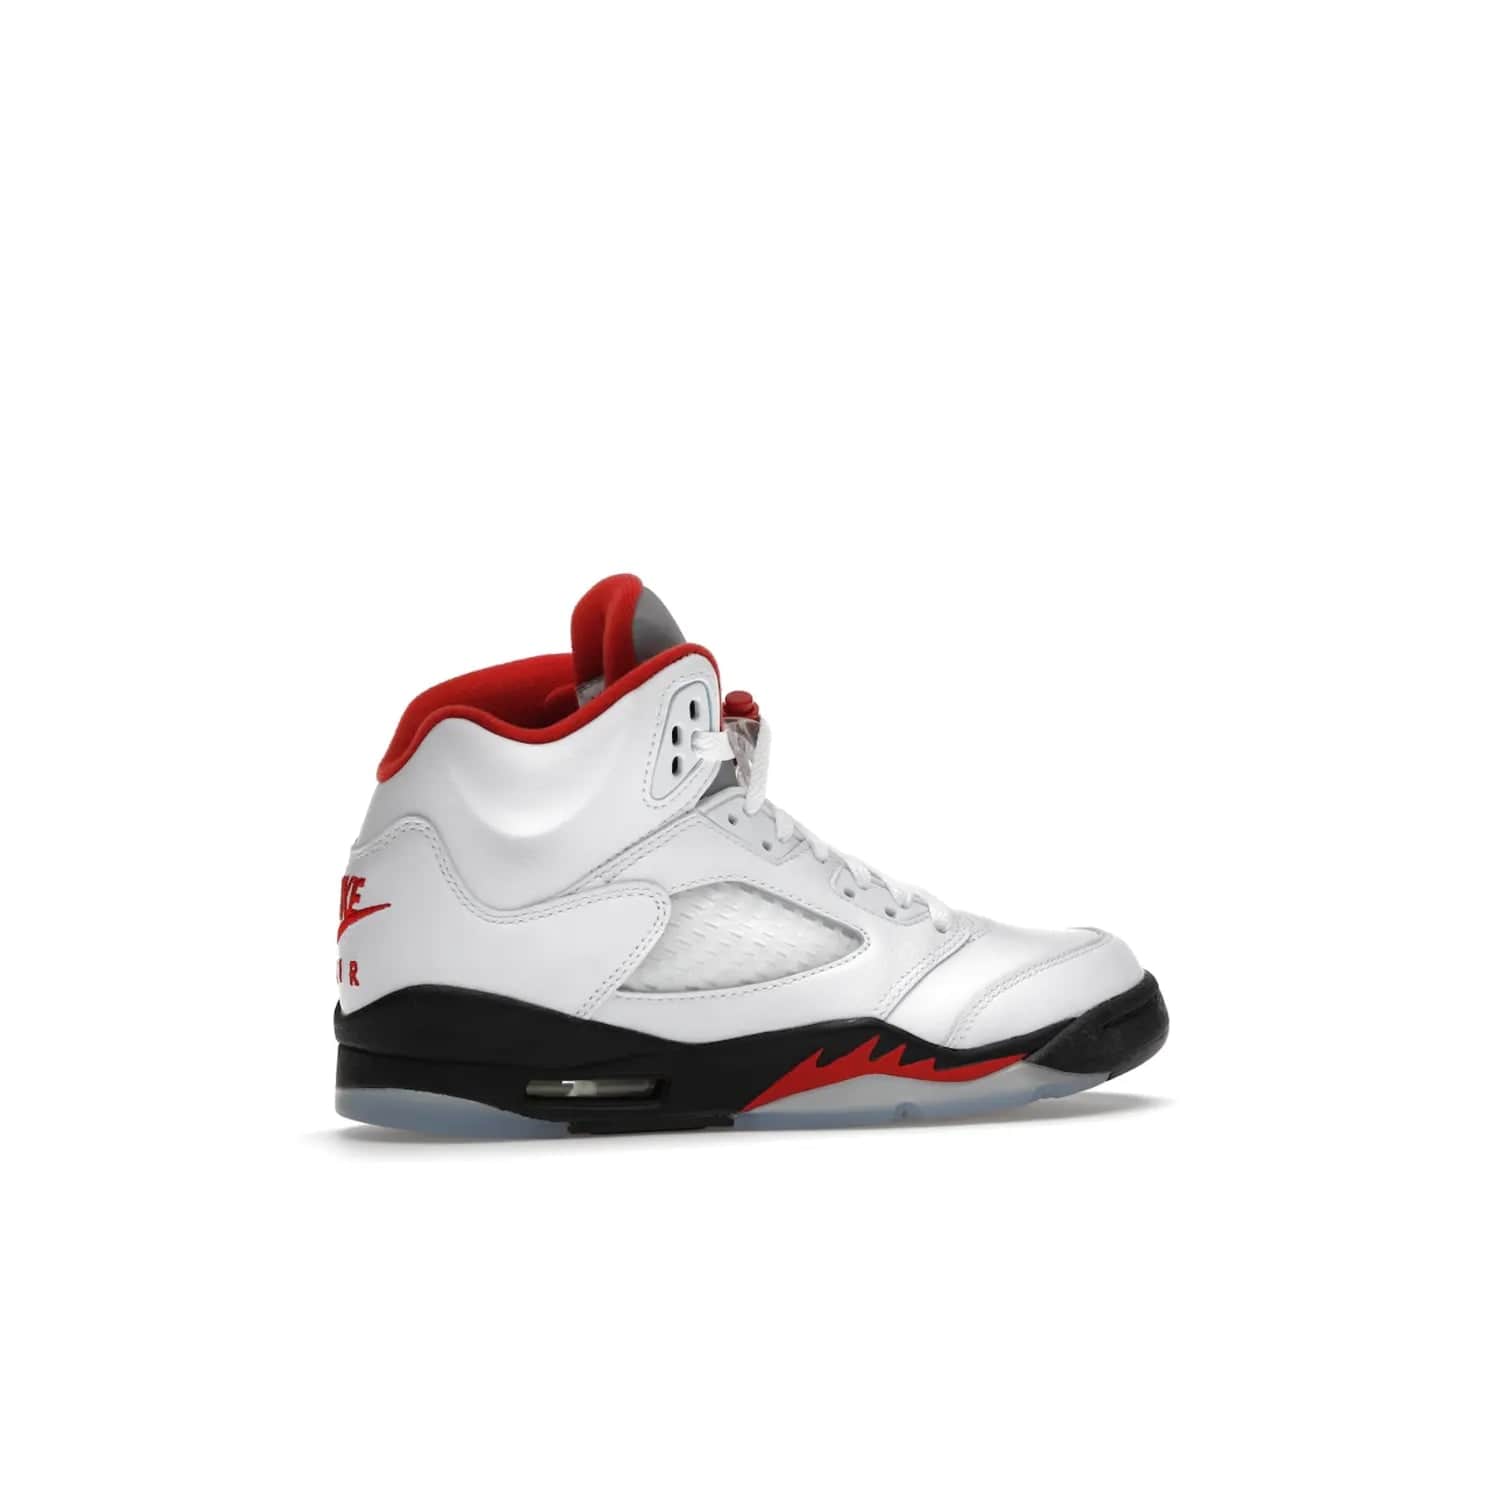 Jordan 5 Retro Fire Red Silver Tongue (2020) (GS) - Image 35 - Only at www.BallersClubKickz.com - A stylish option for any grade schooler. The Air Jordan 5 Retro Fire Red Silver Tongue 2020 GS features a combination of four hues, premium white leather, a clear mesh mid-upper and a reflective silver tongue. An icy translucent blue outsole completes the look. Available on May 2, $150.